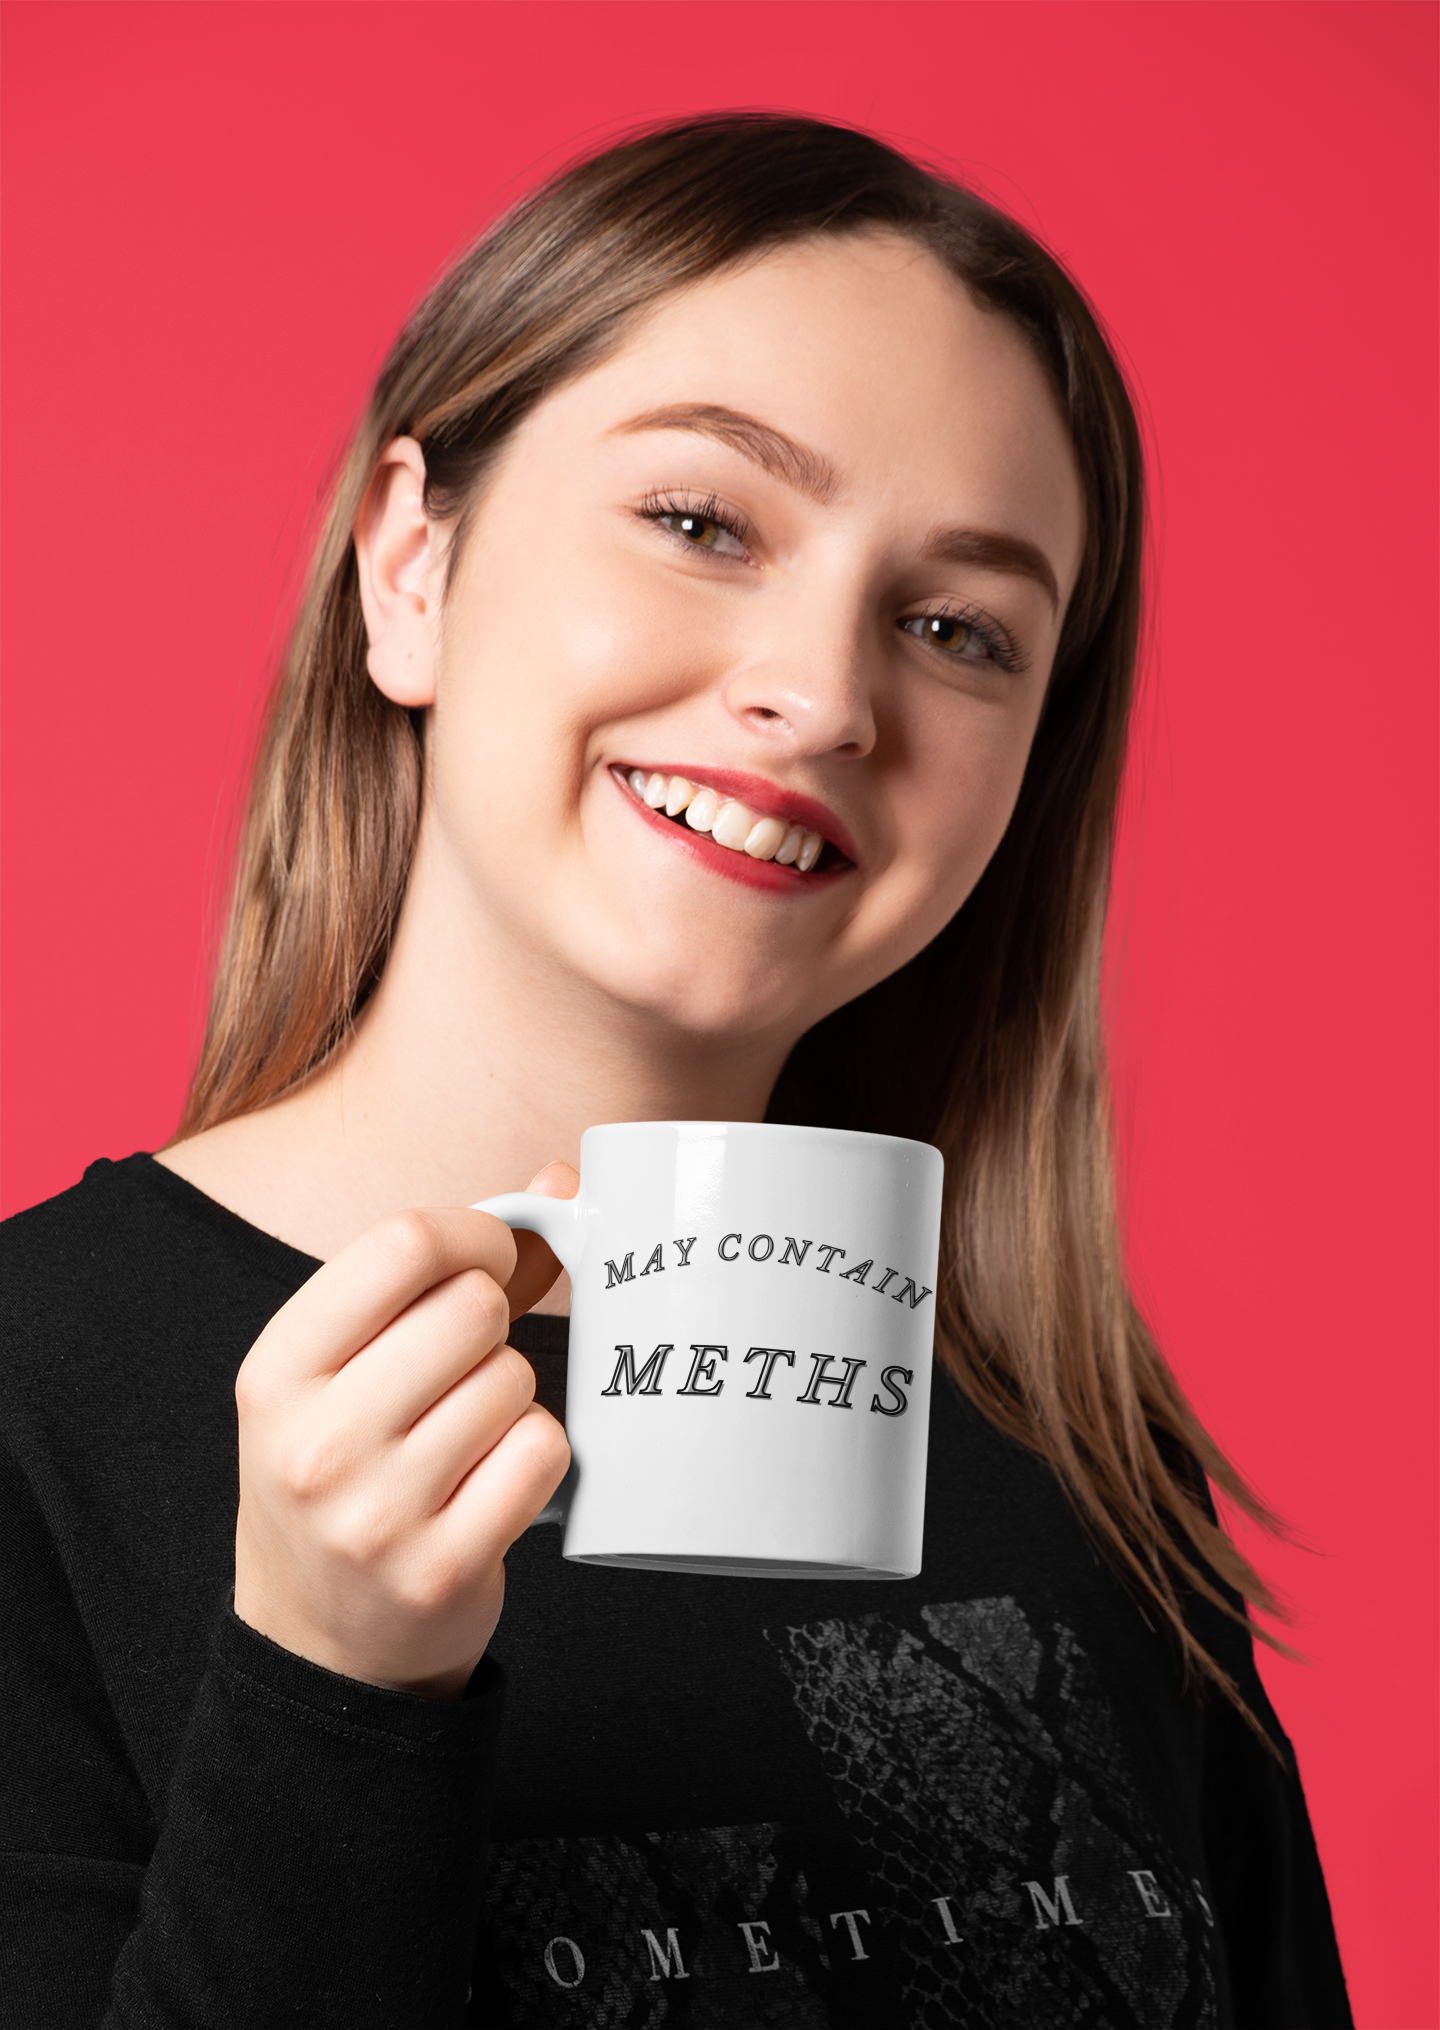 Humorous Premium Quality 11oz Ceramic Coffee Mug With May Contain Meths Written On The Sides | Funny Mug For Office | Amusing Cup For Tea